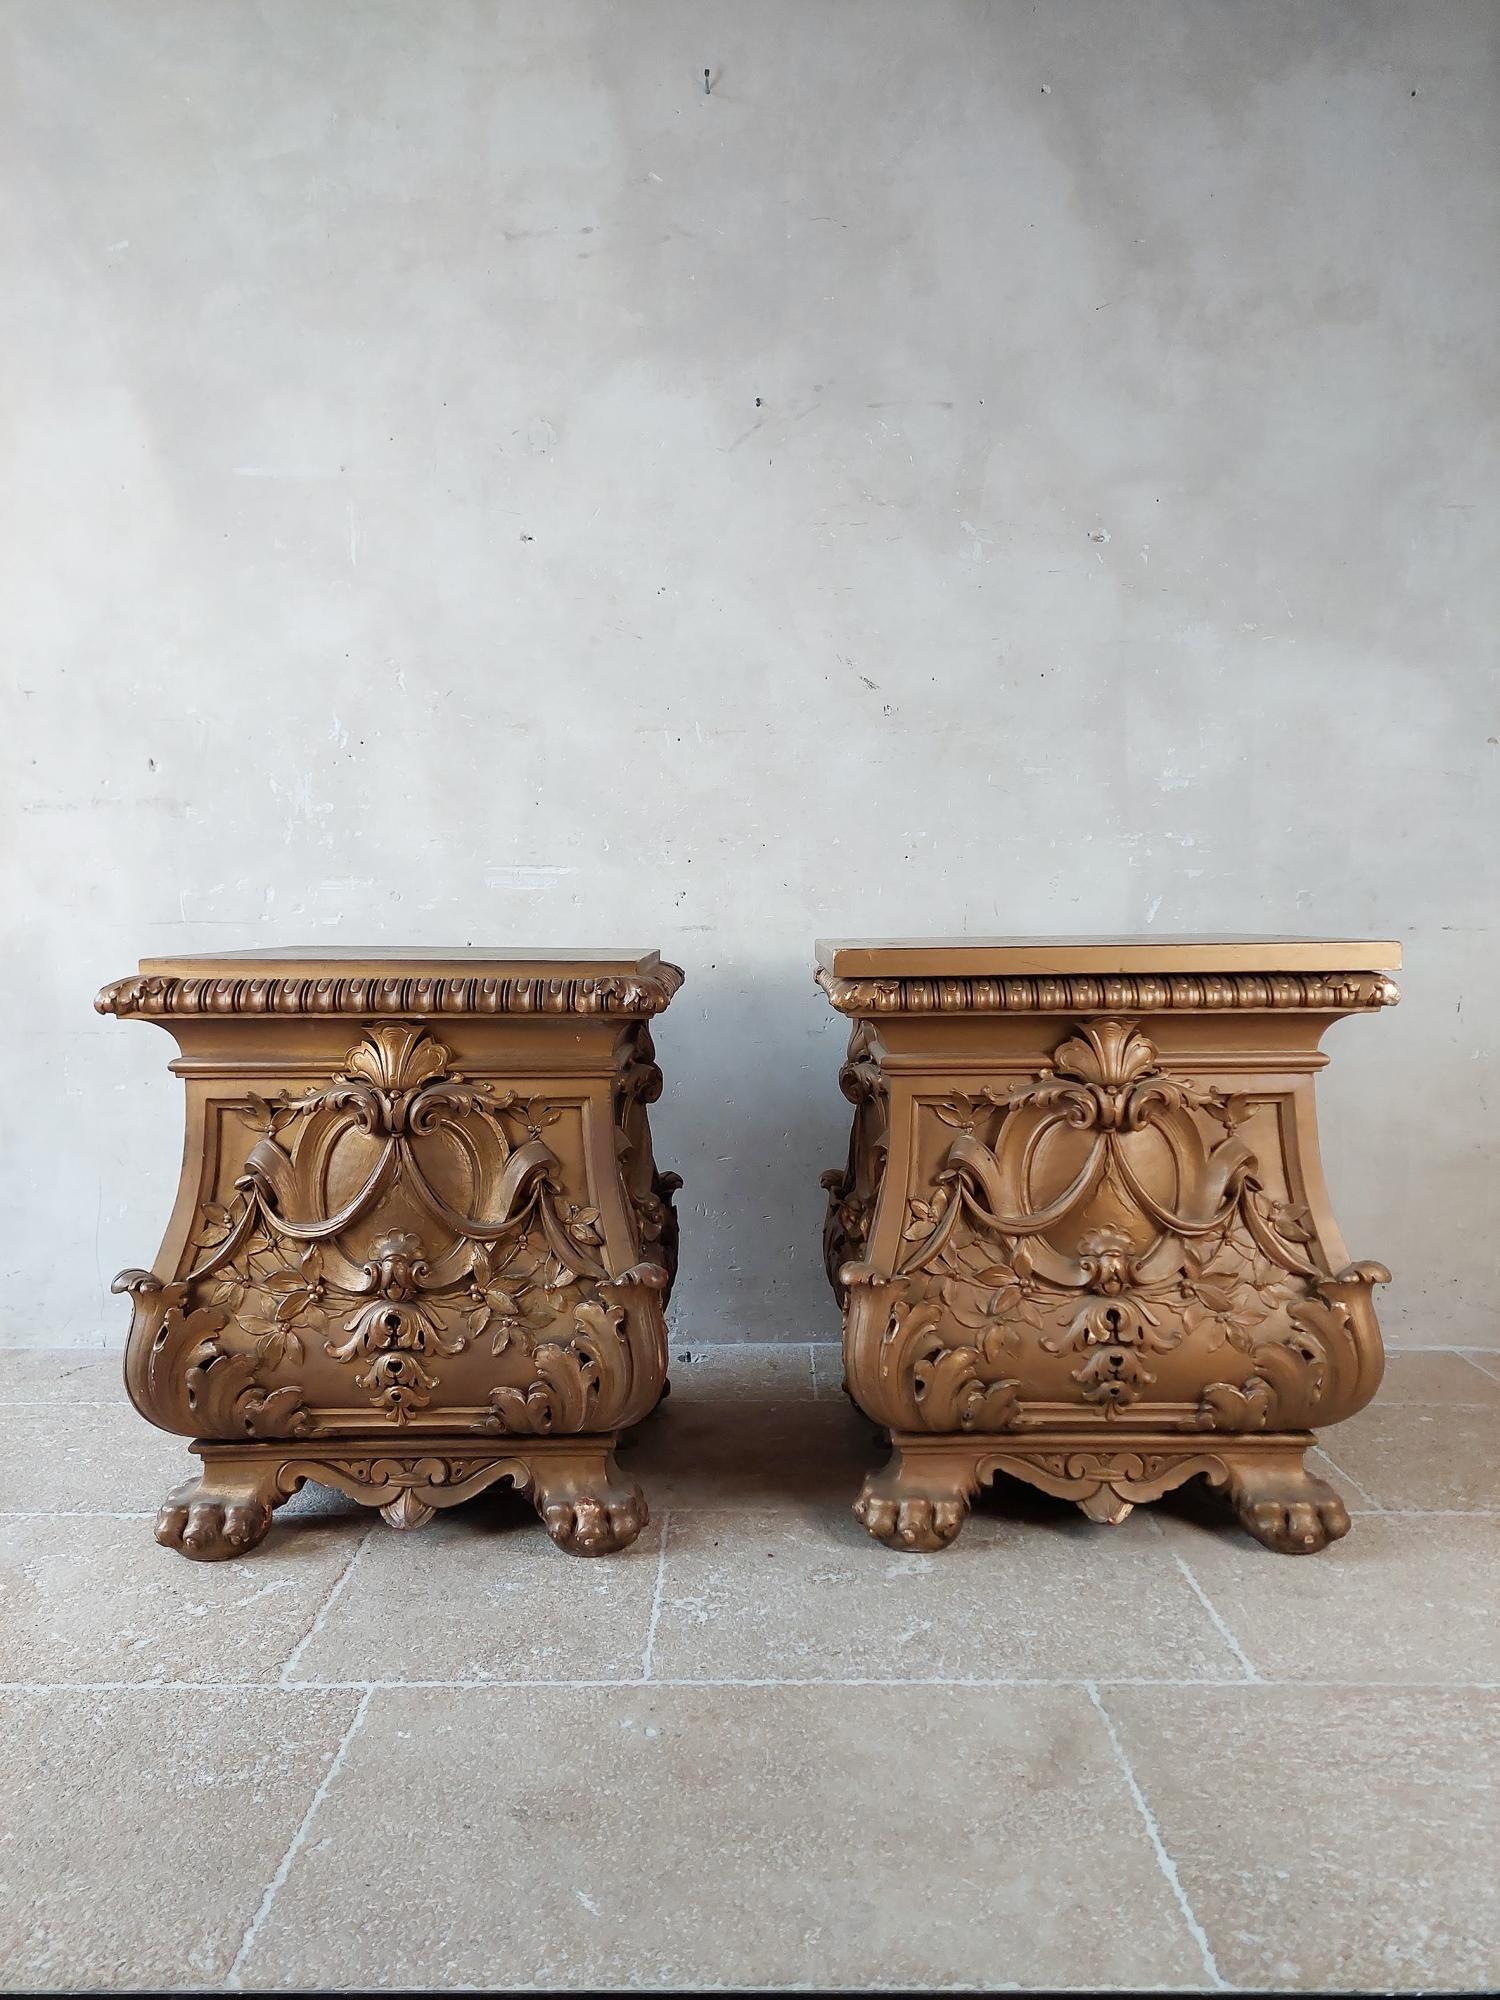 Pair of (almost) antique gold patinated wooden pedestals. On four sides with gesso decorations such as a cartouche, acanthus leaf and flowers. The pedestals have claw feet and have a beautiful gold-colored patina. Stamped and dated